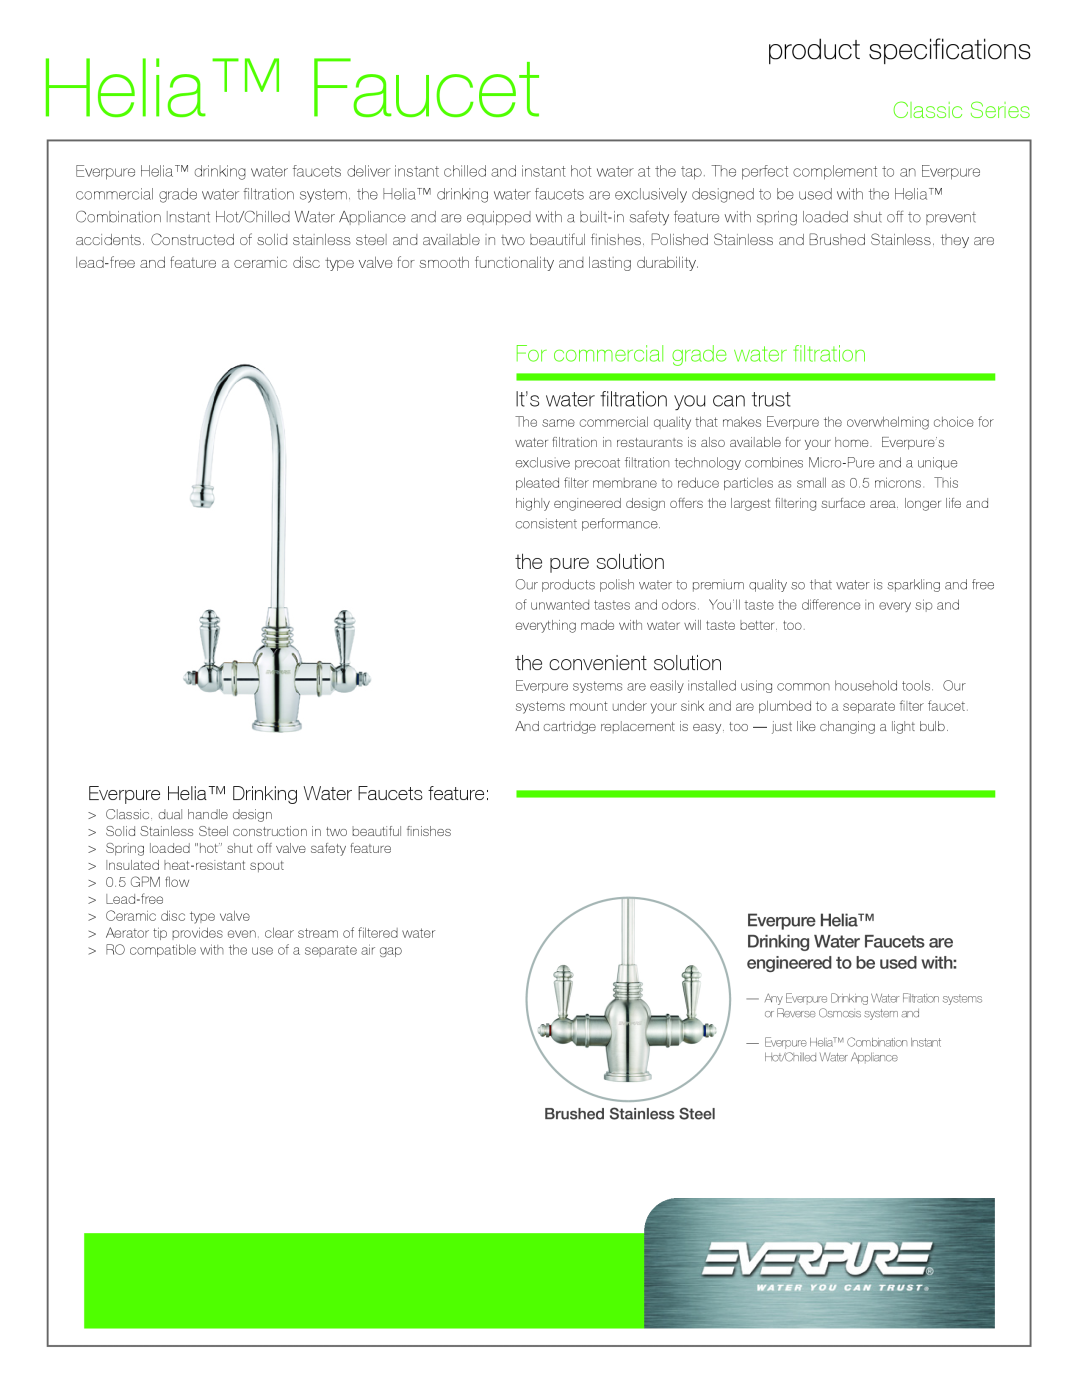 Everpure EV9007-21 manual Helia Faucet, Classic Series, For commercial grade water filtration, the pure solution 